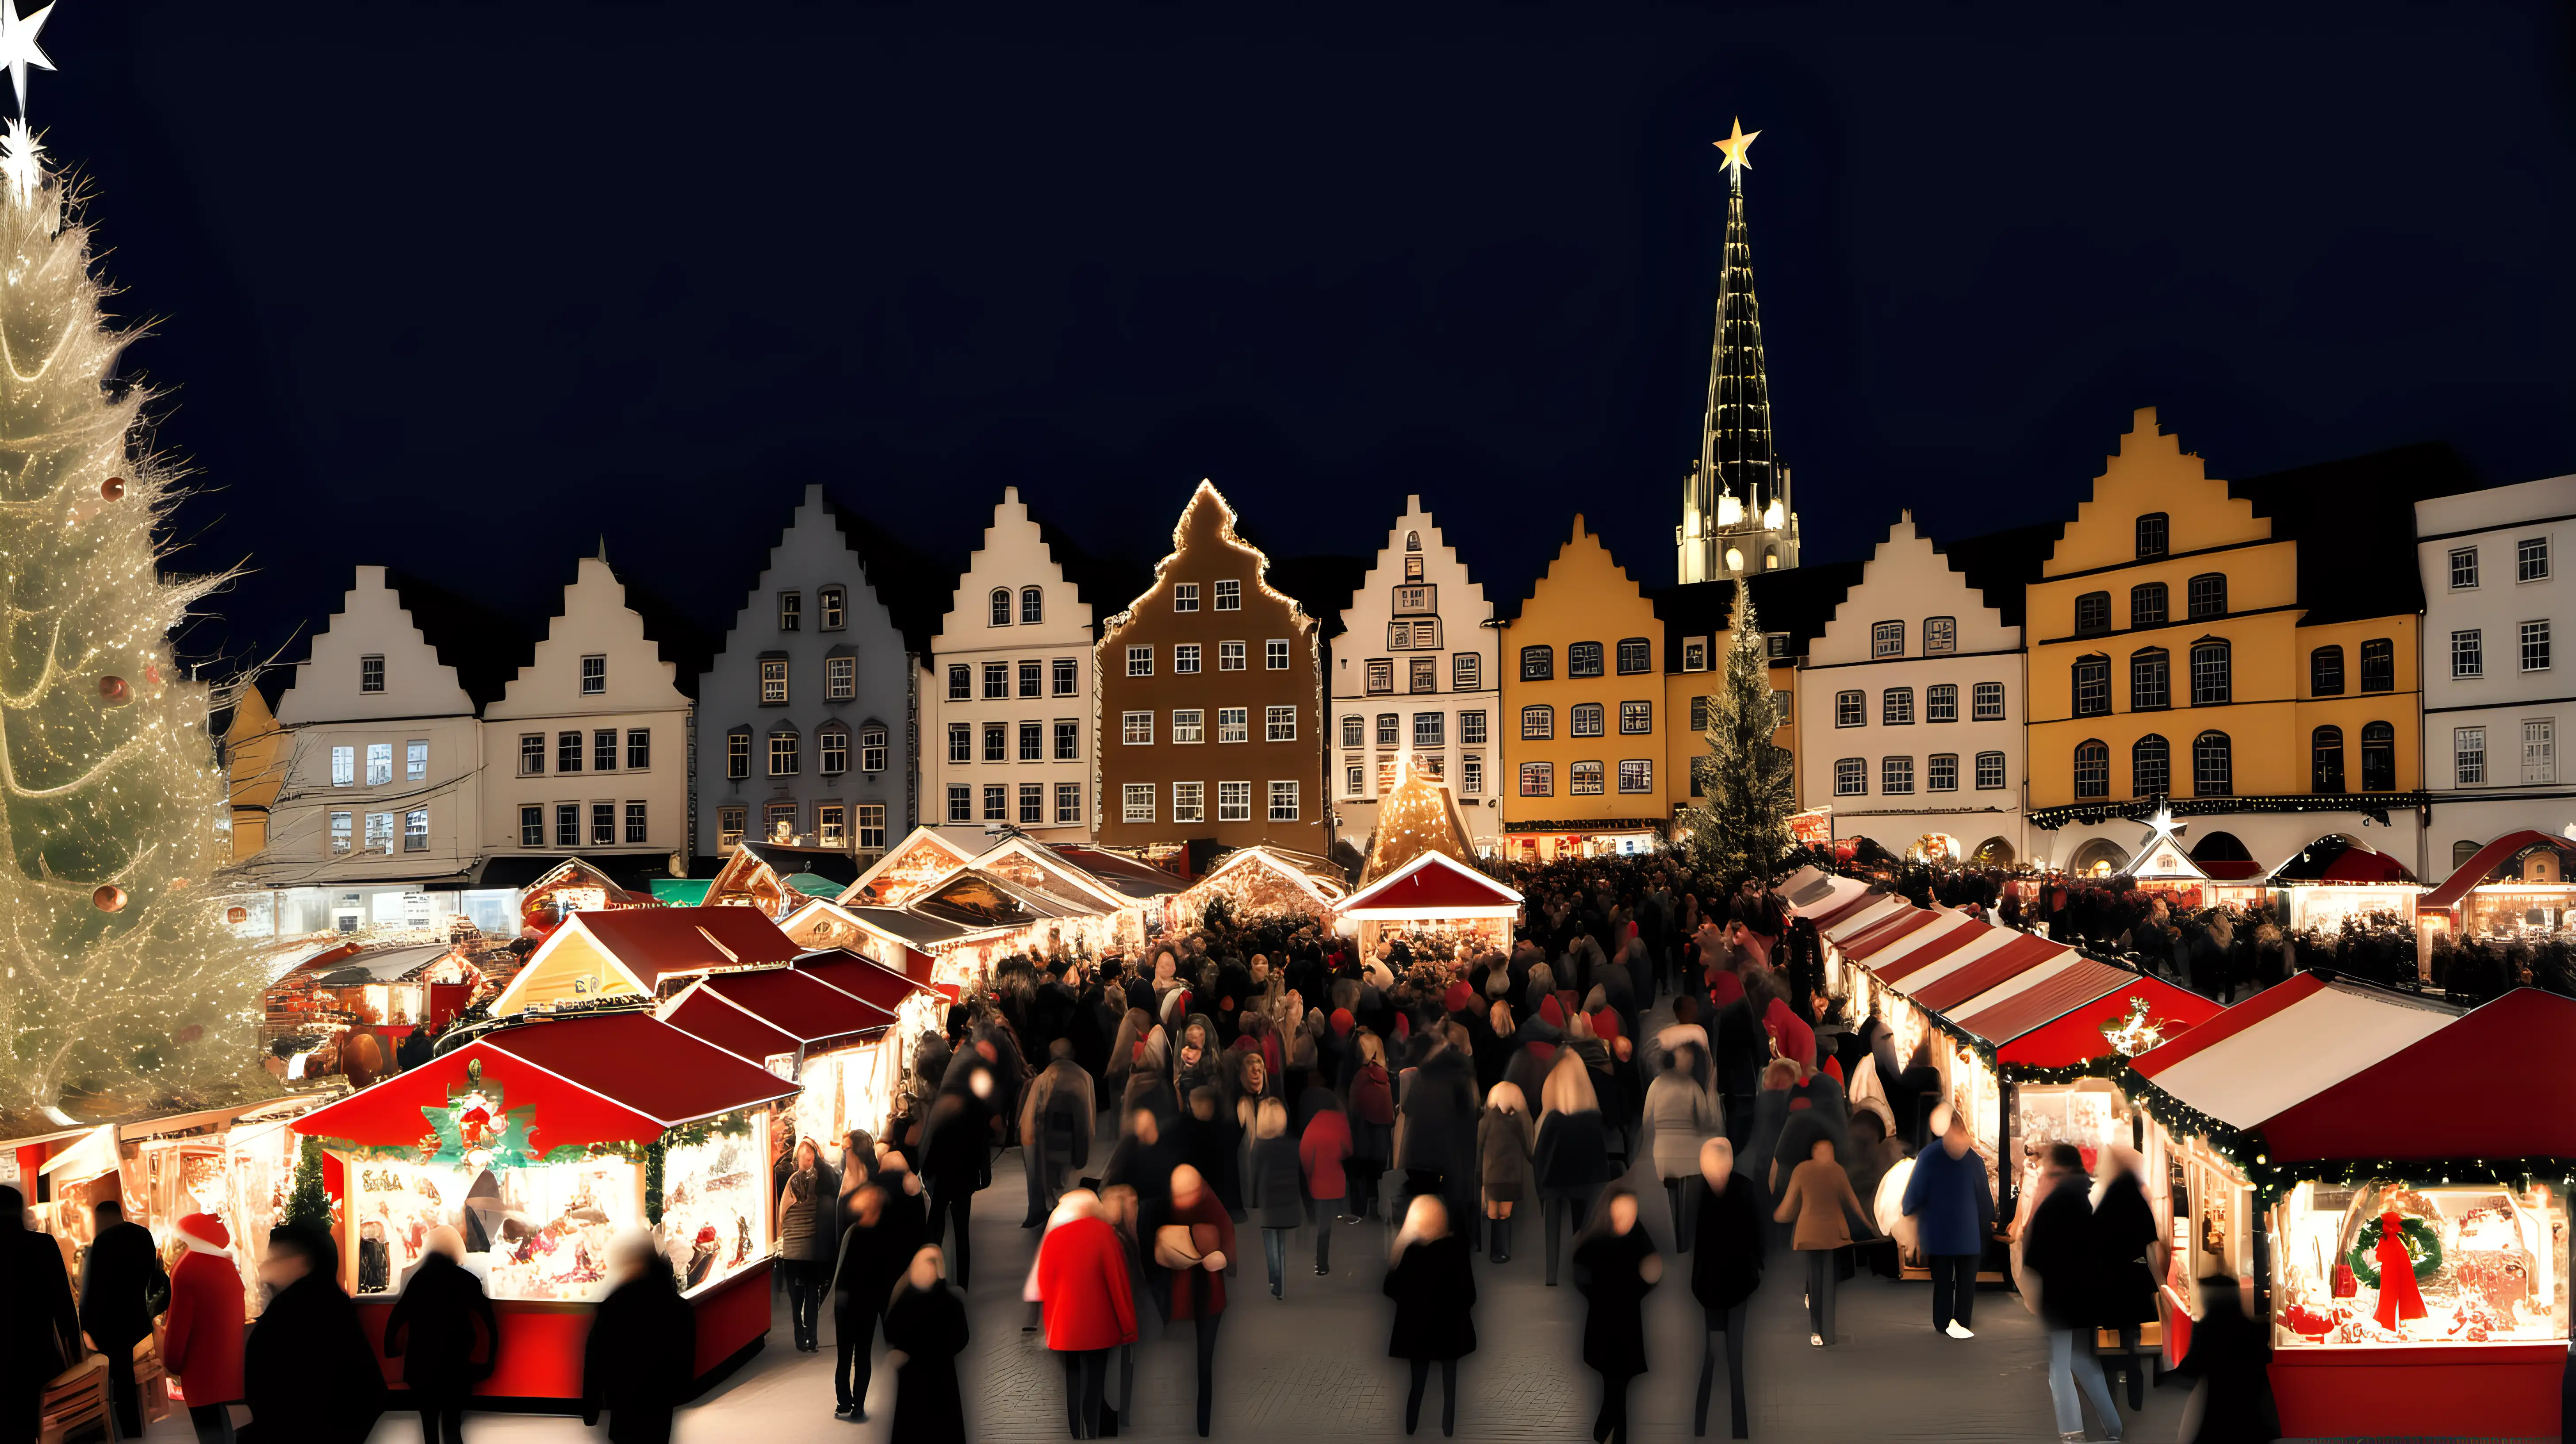 "Capture the enchanting beauty of a Christmas market bustling with shoppers and twinkling lights."